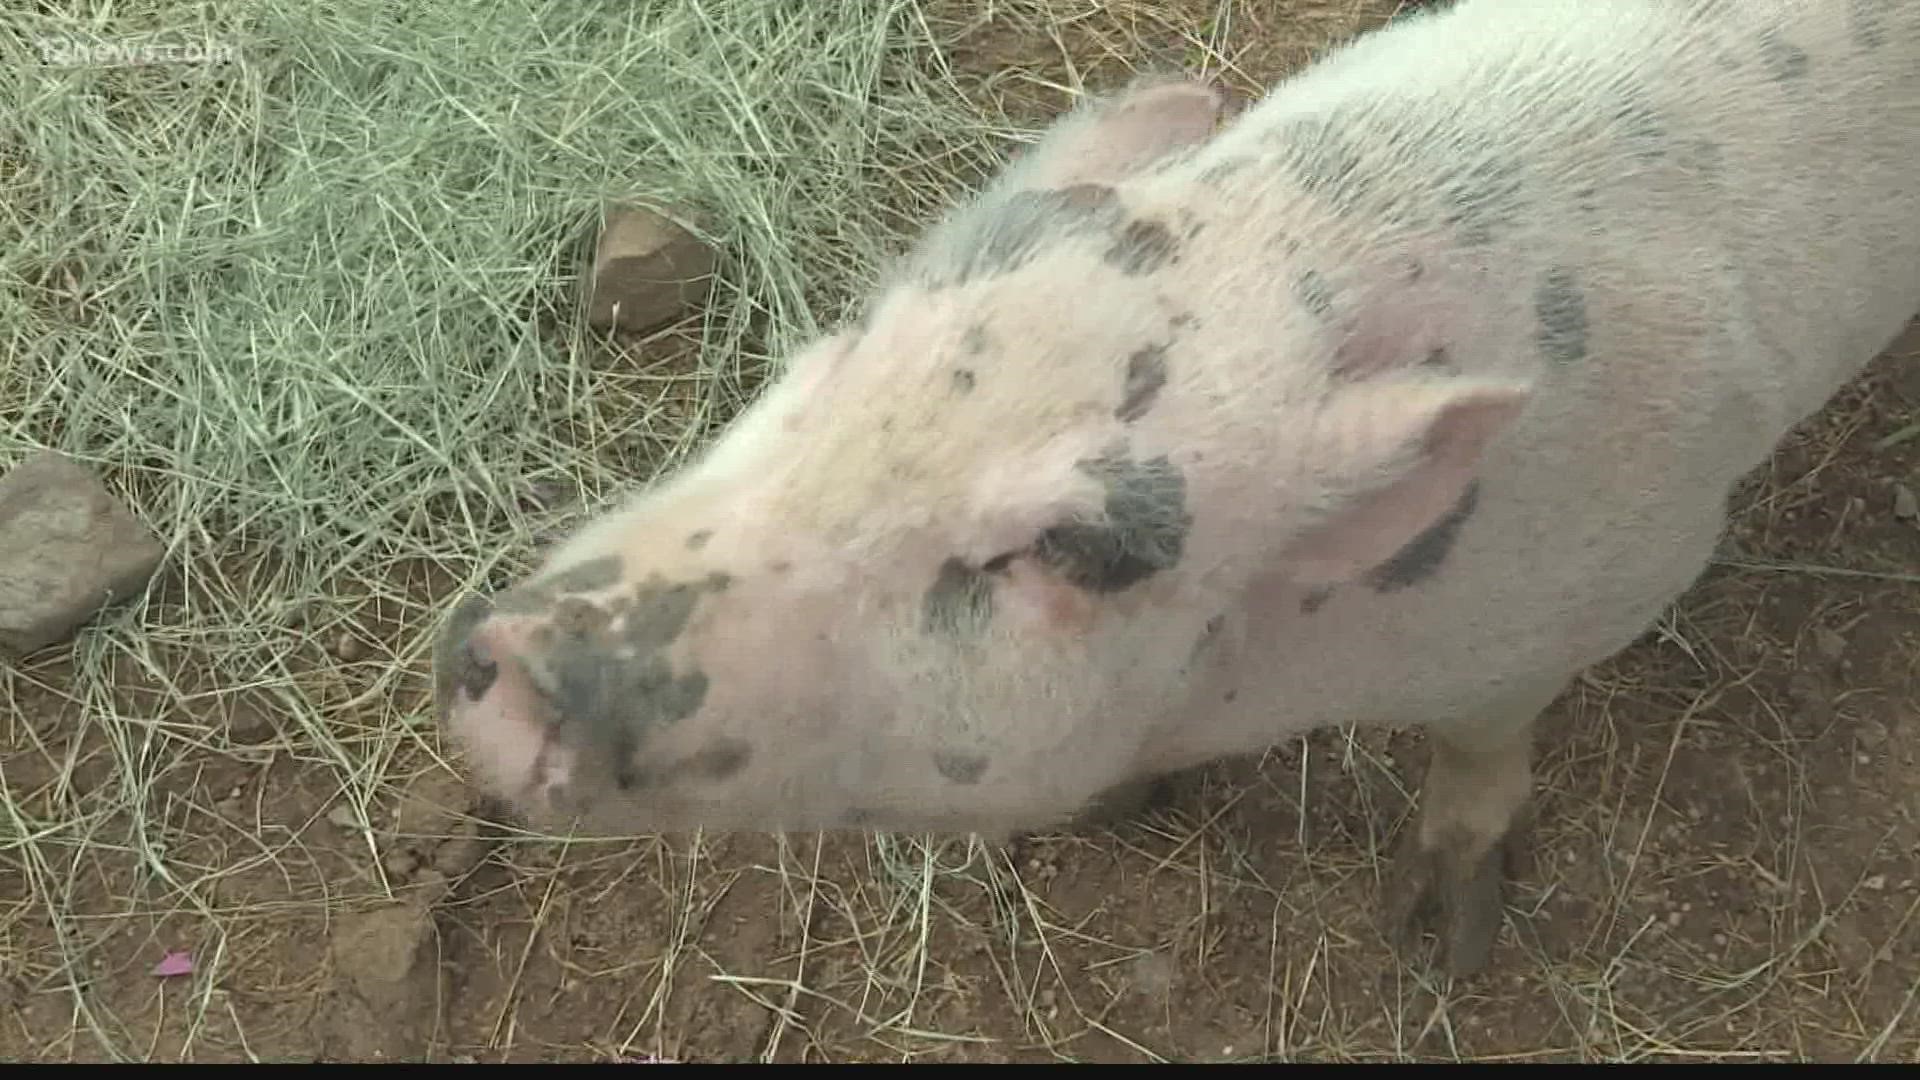 Some people think pigs would make a great pet but when they go into heat, watch out! That’s when some owners have been known to abandon their pet pig.